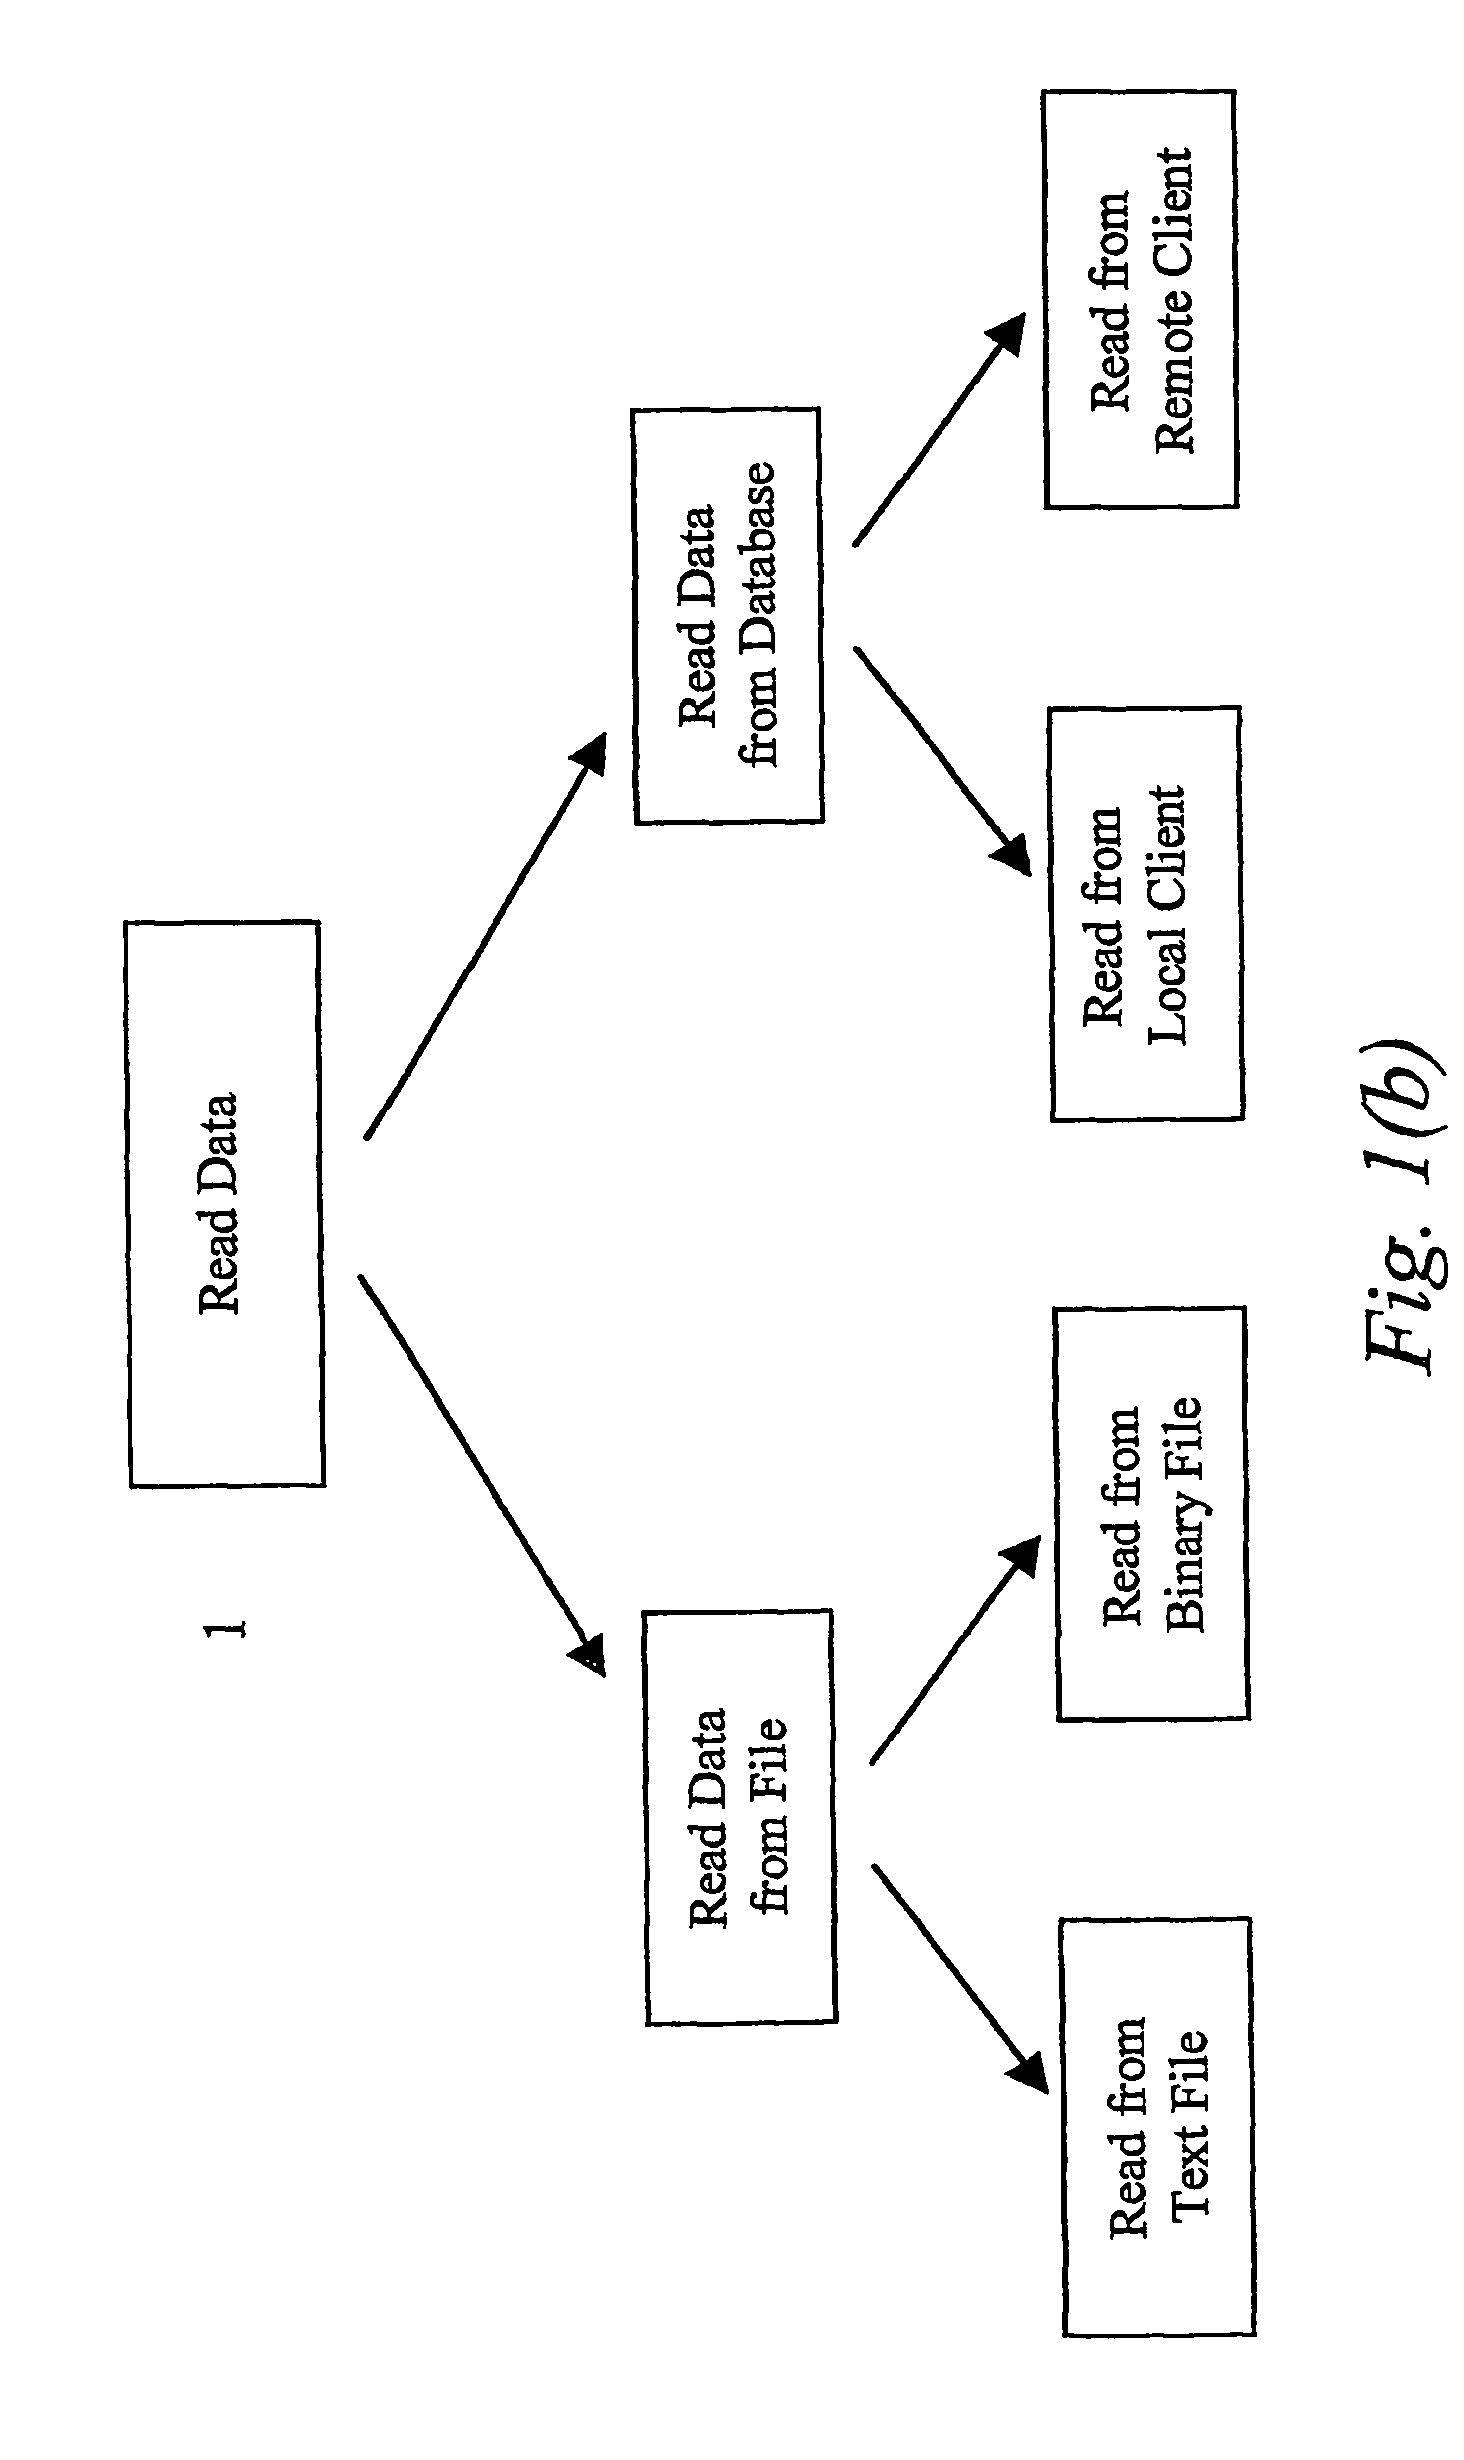 Methods and apparatus for calculating and presenting the probabilistic functional maps of the human brain